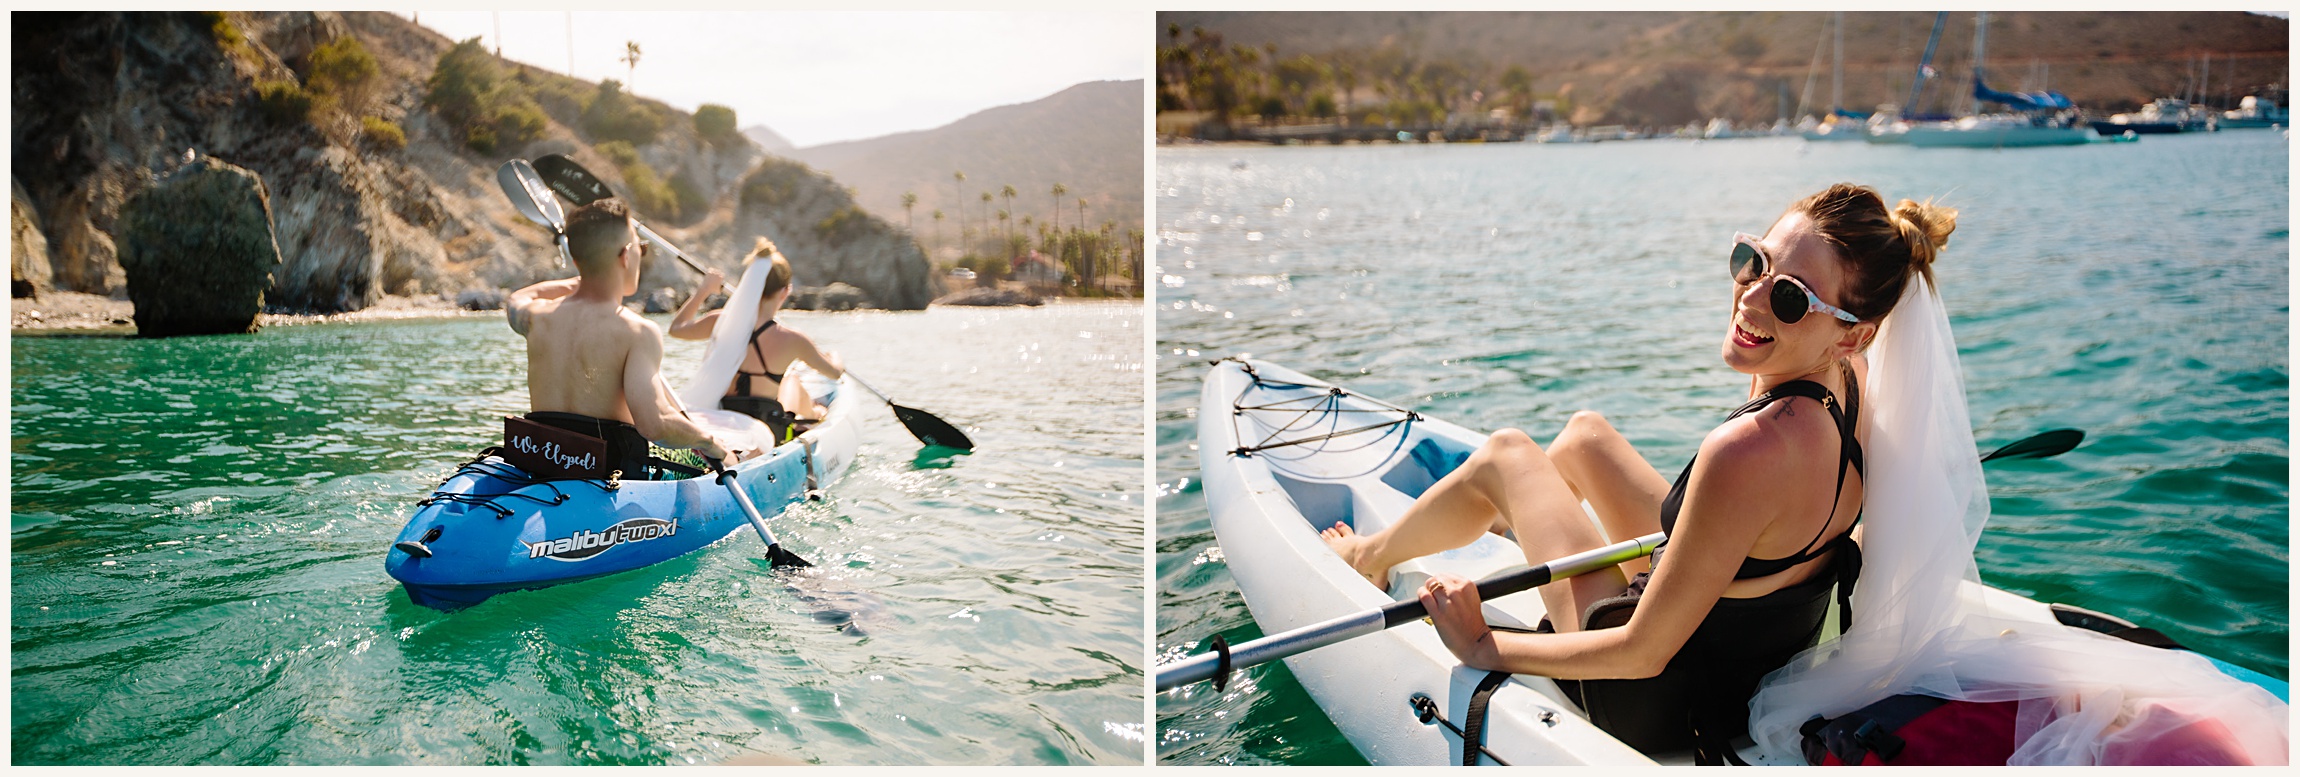 Photo of bride and groom kayaking in Catalina Island with We Eloped sign on the back of the Kayak